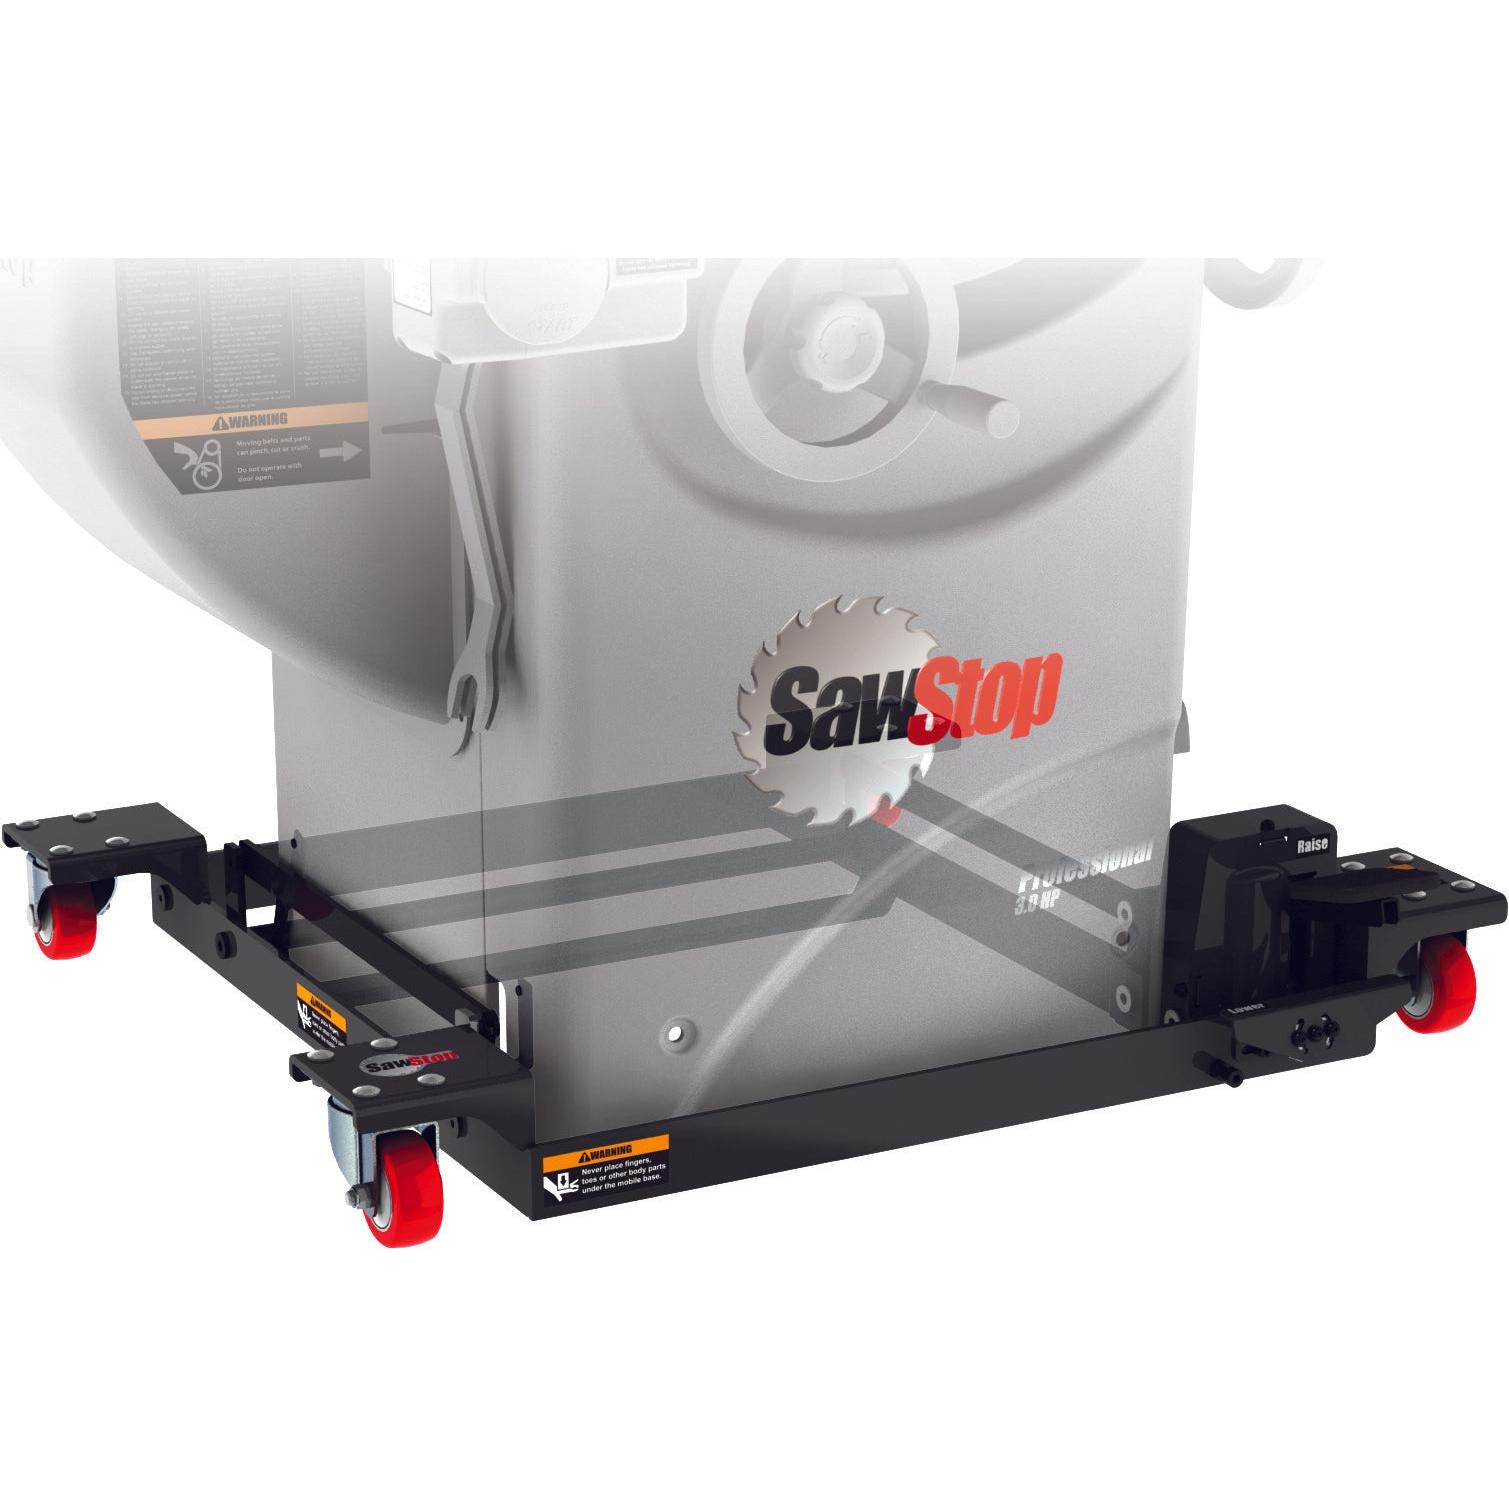 Sawstop Industrial Mobile Base for ICS MB-PCS-IND Power Tool Services